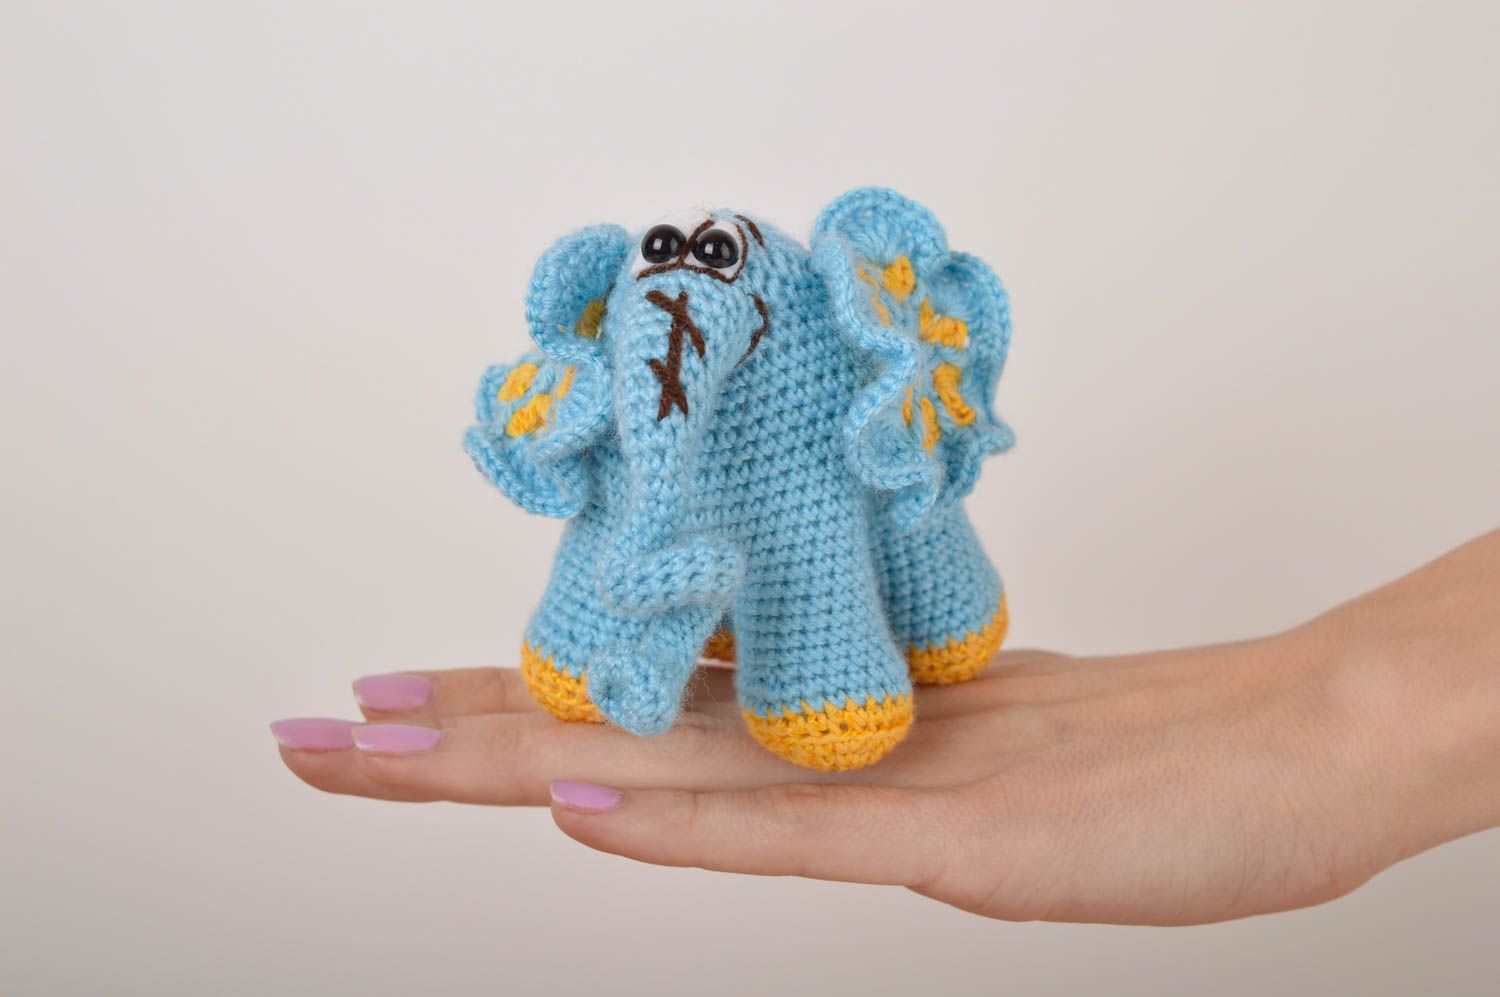 Cute toy hand-crocheted toys for children handmade soft toys for babies photo 5